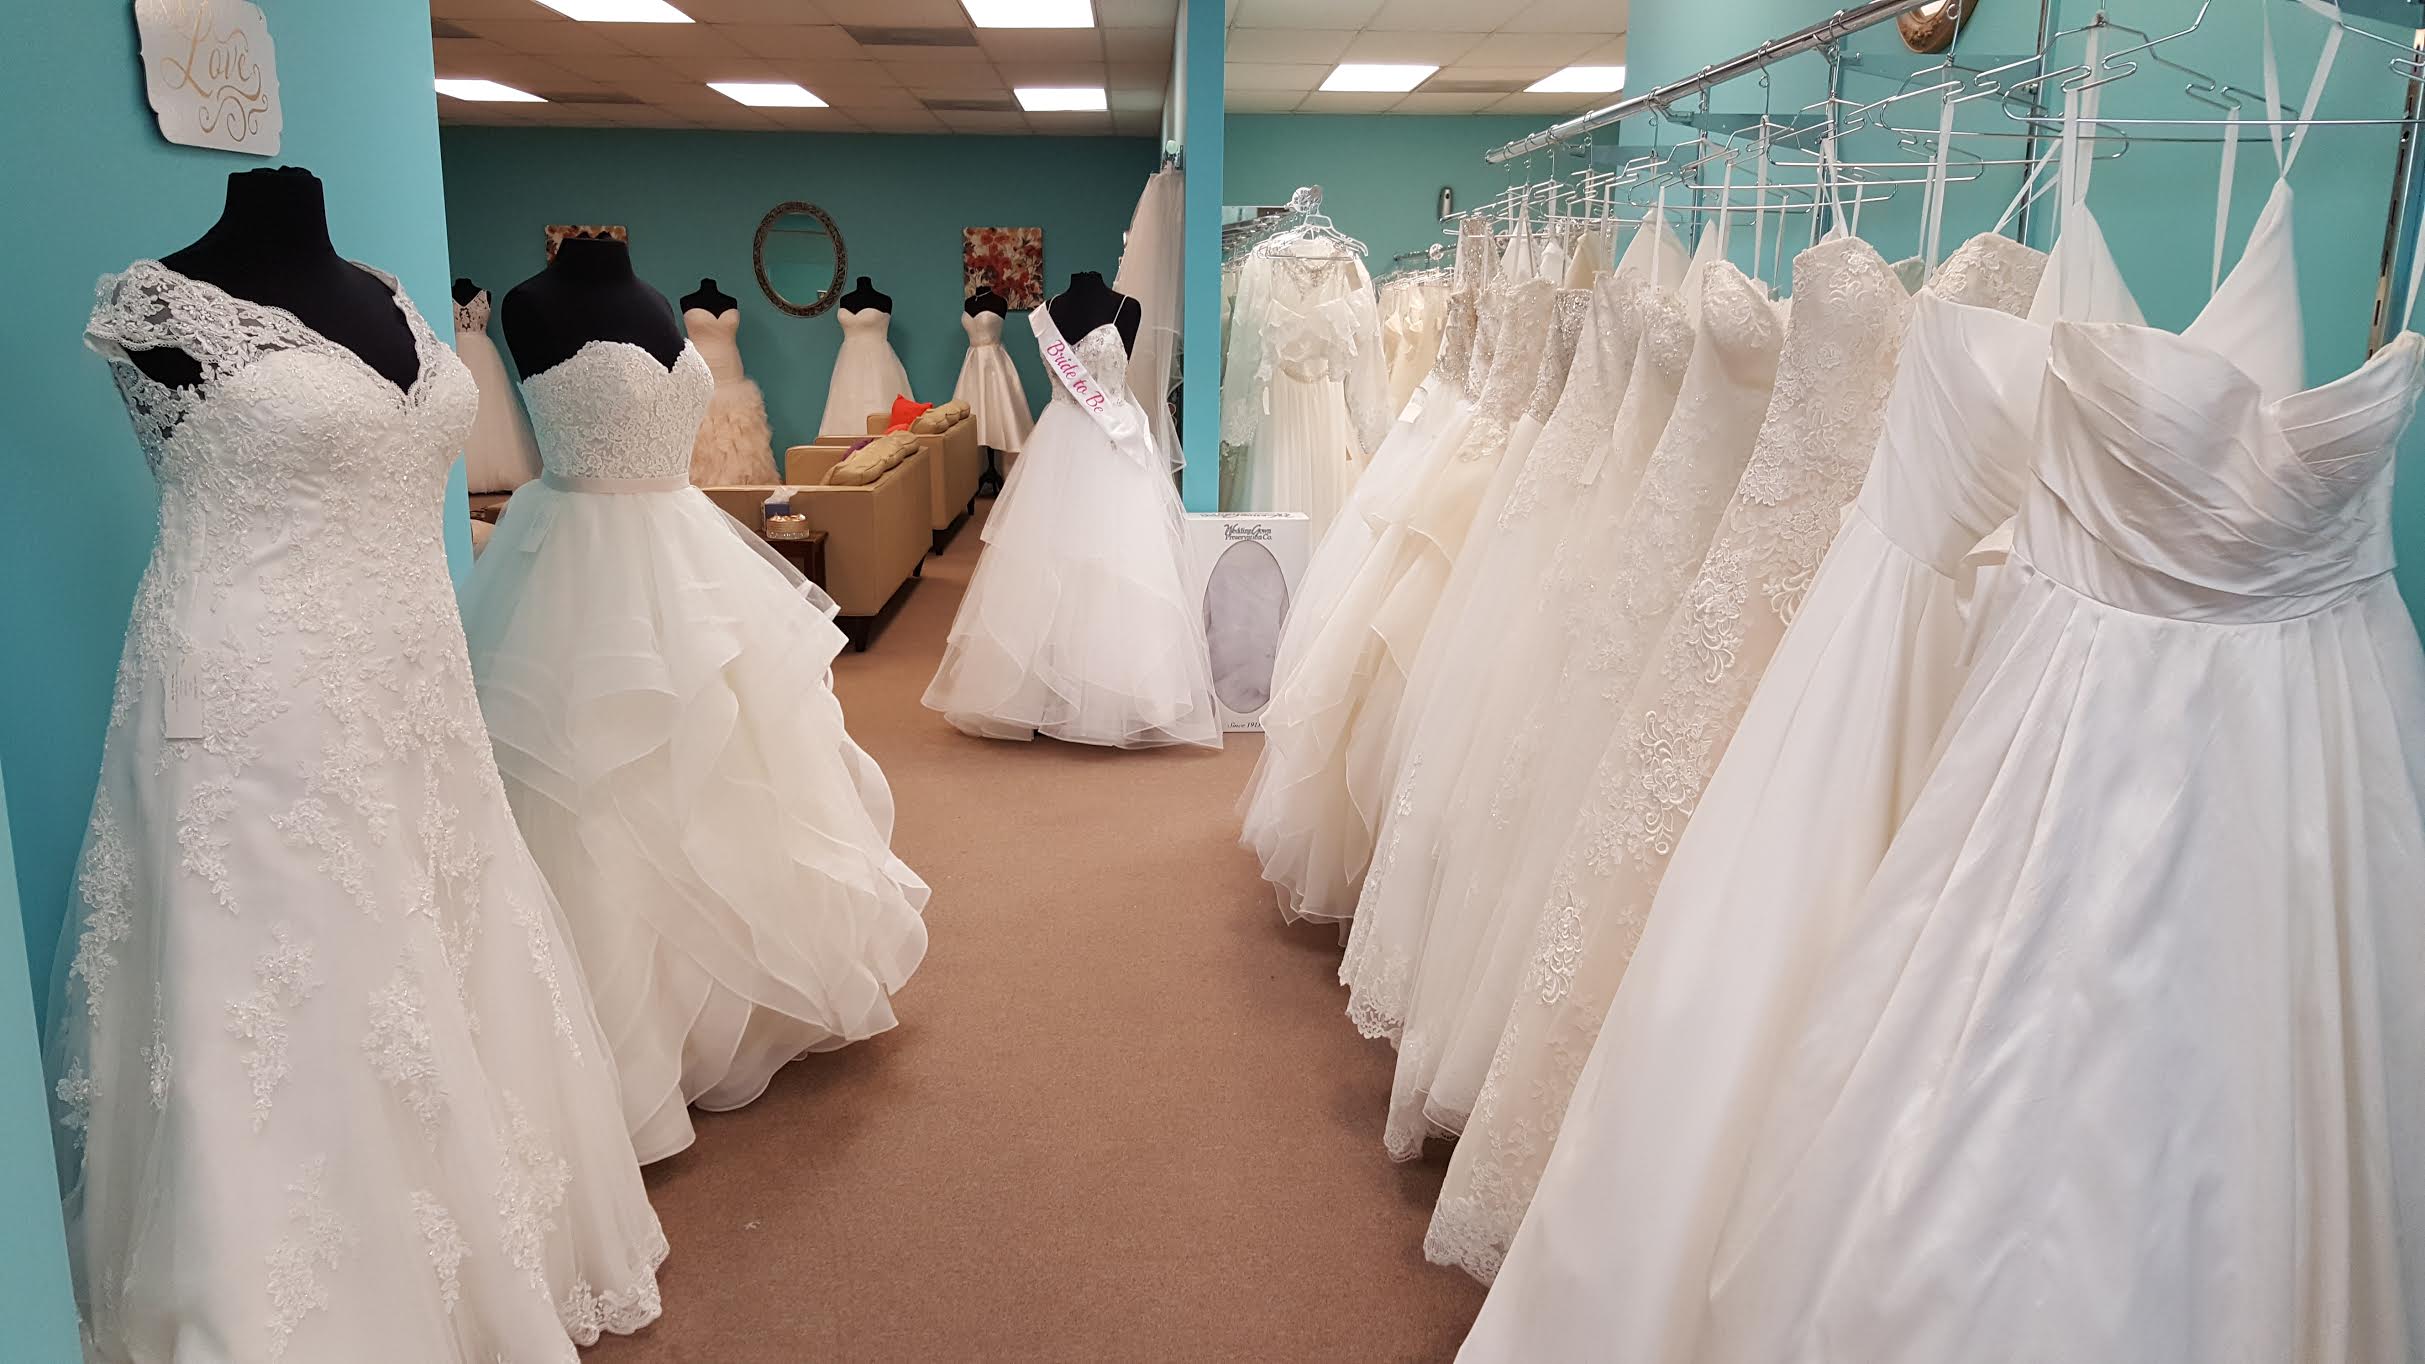 Wedding Dress Shopping Tips - Book Your Experience